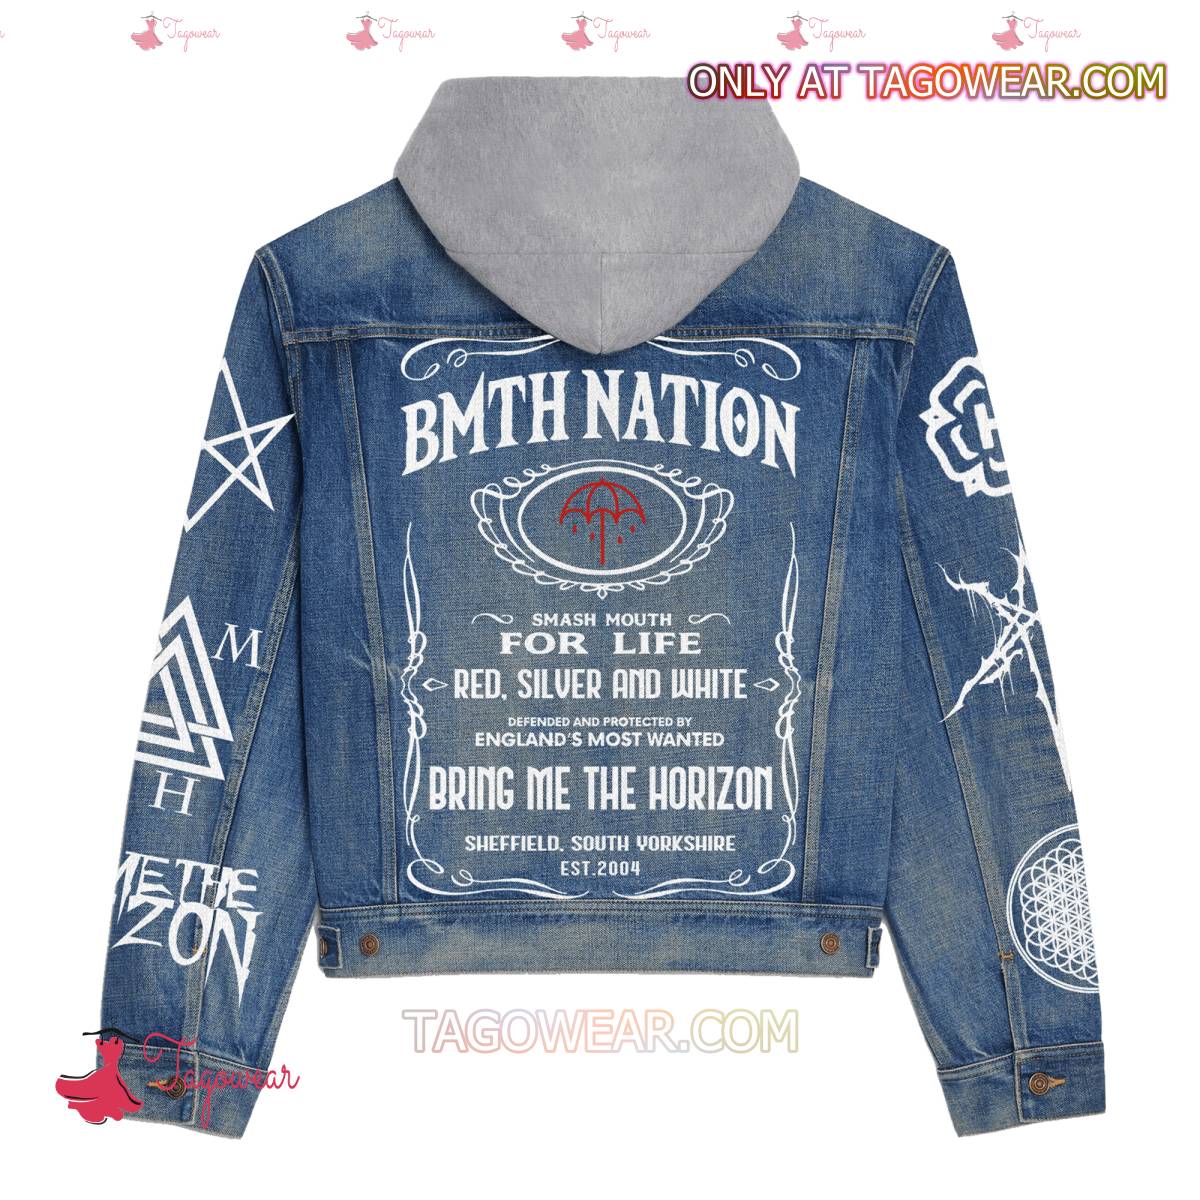 Bring Me The Horizon Nation Smash Mouth For Life Red Silver And White Jean Hoodie Jacket b